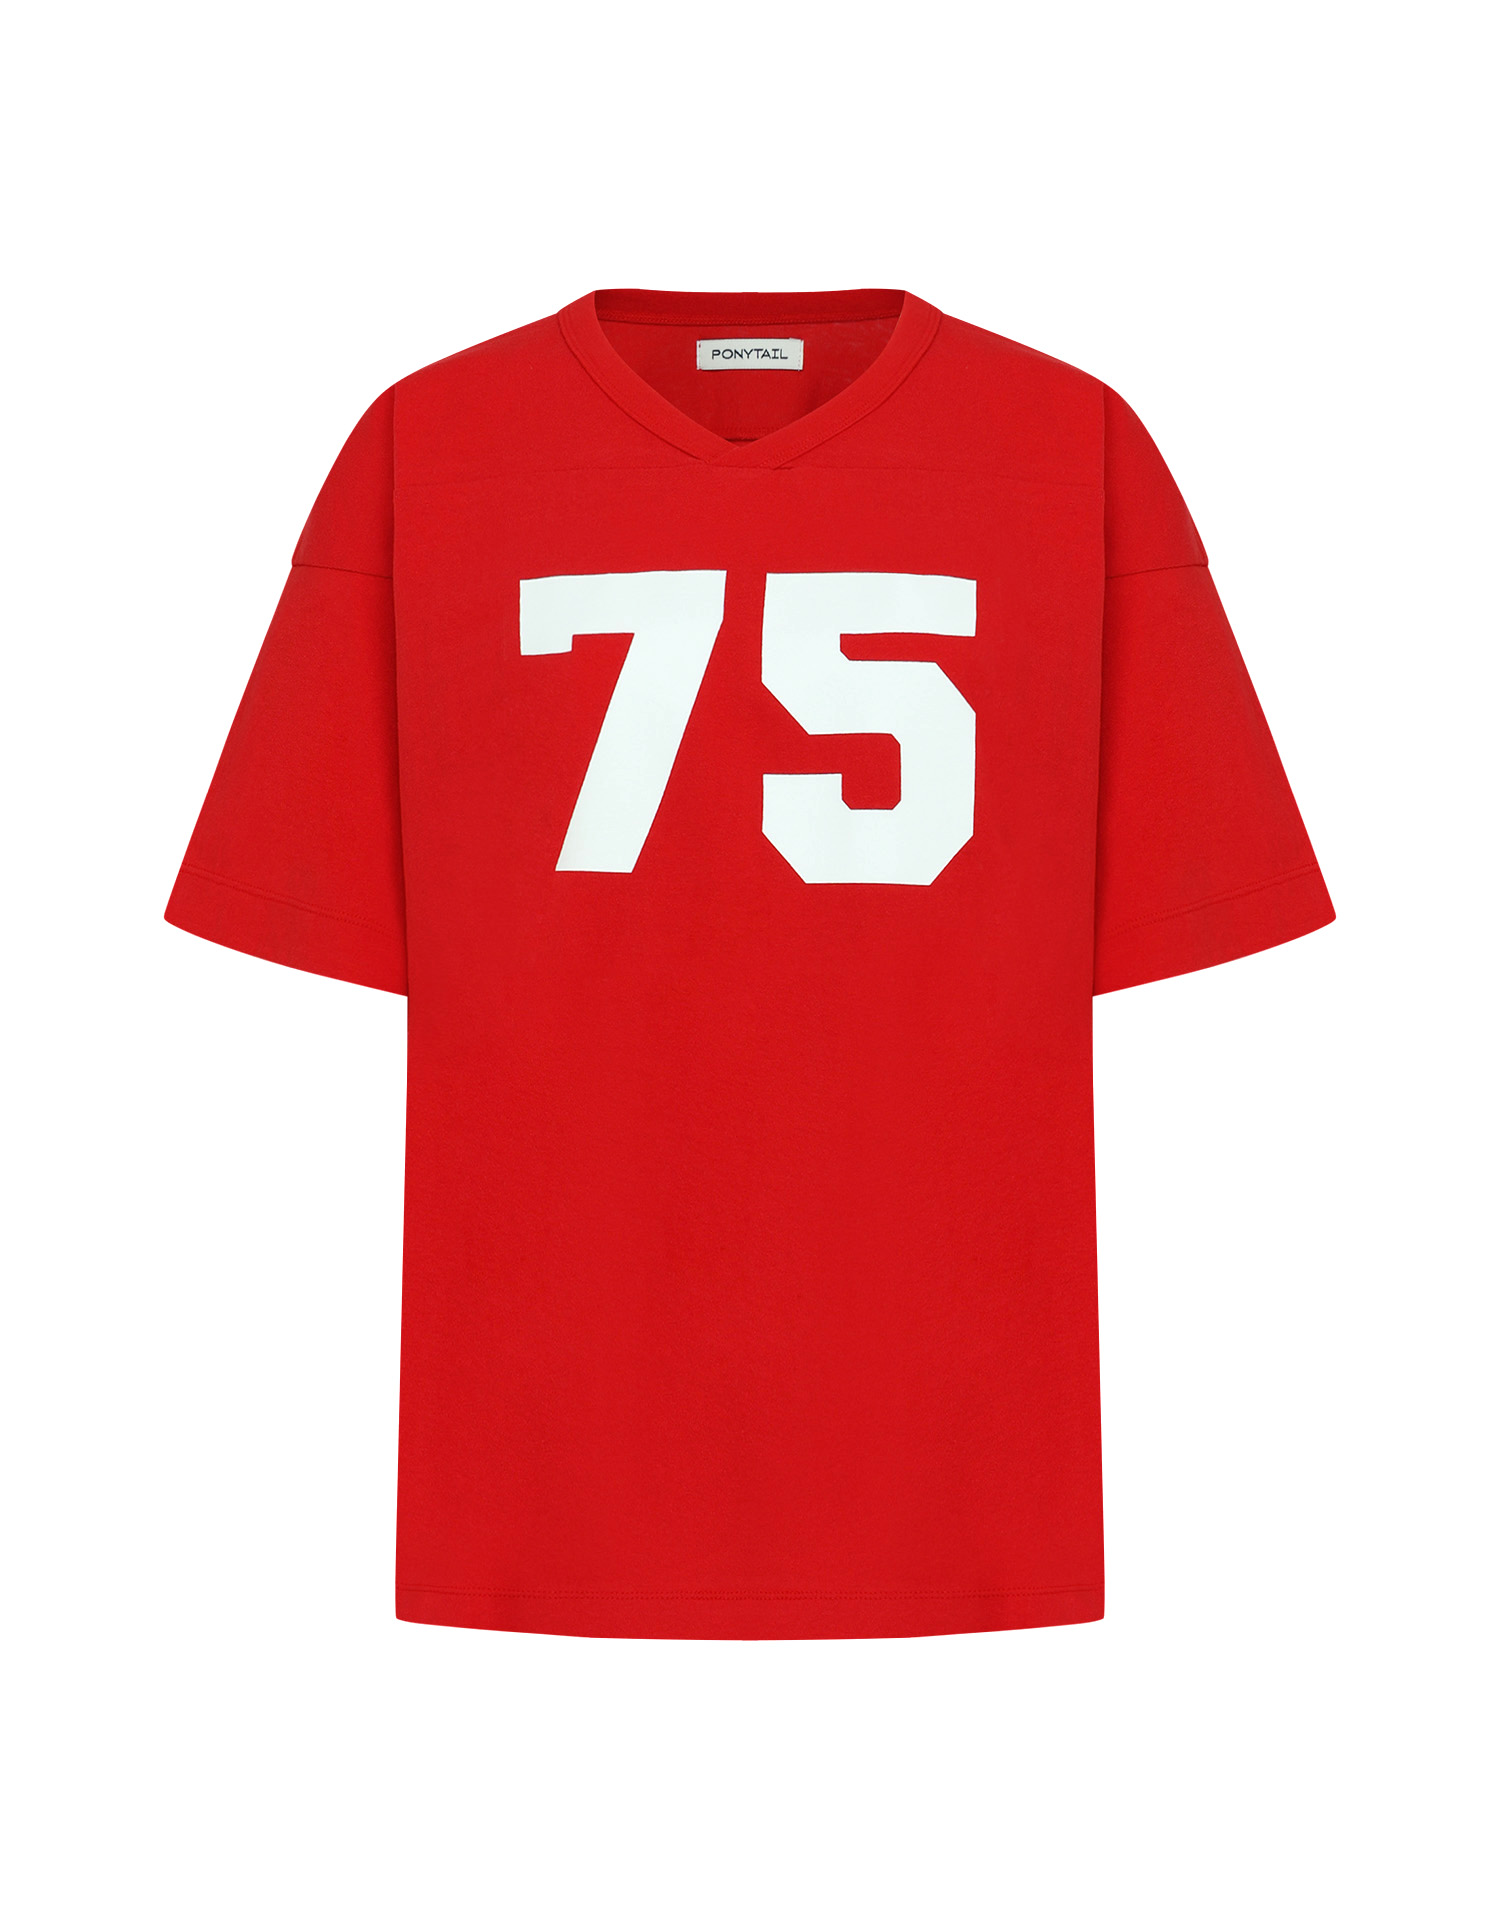 75 Rugby T-shirts (Vintage Red) - 포니테일